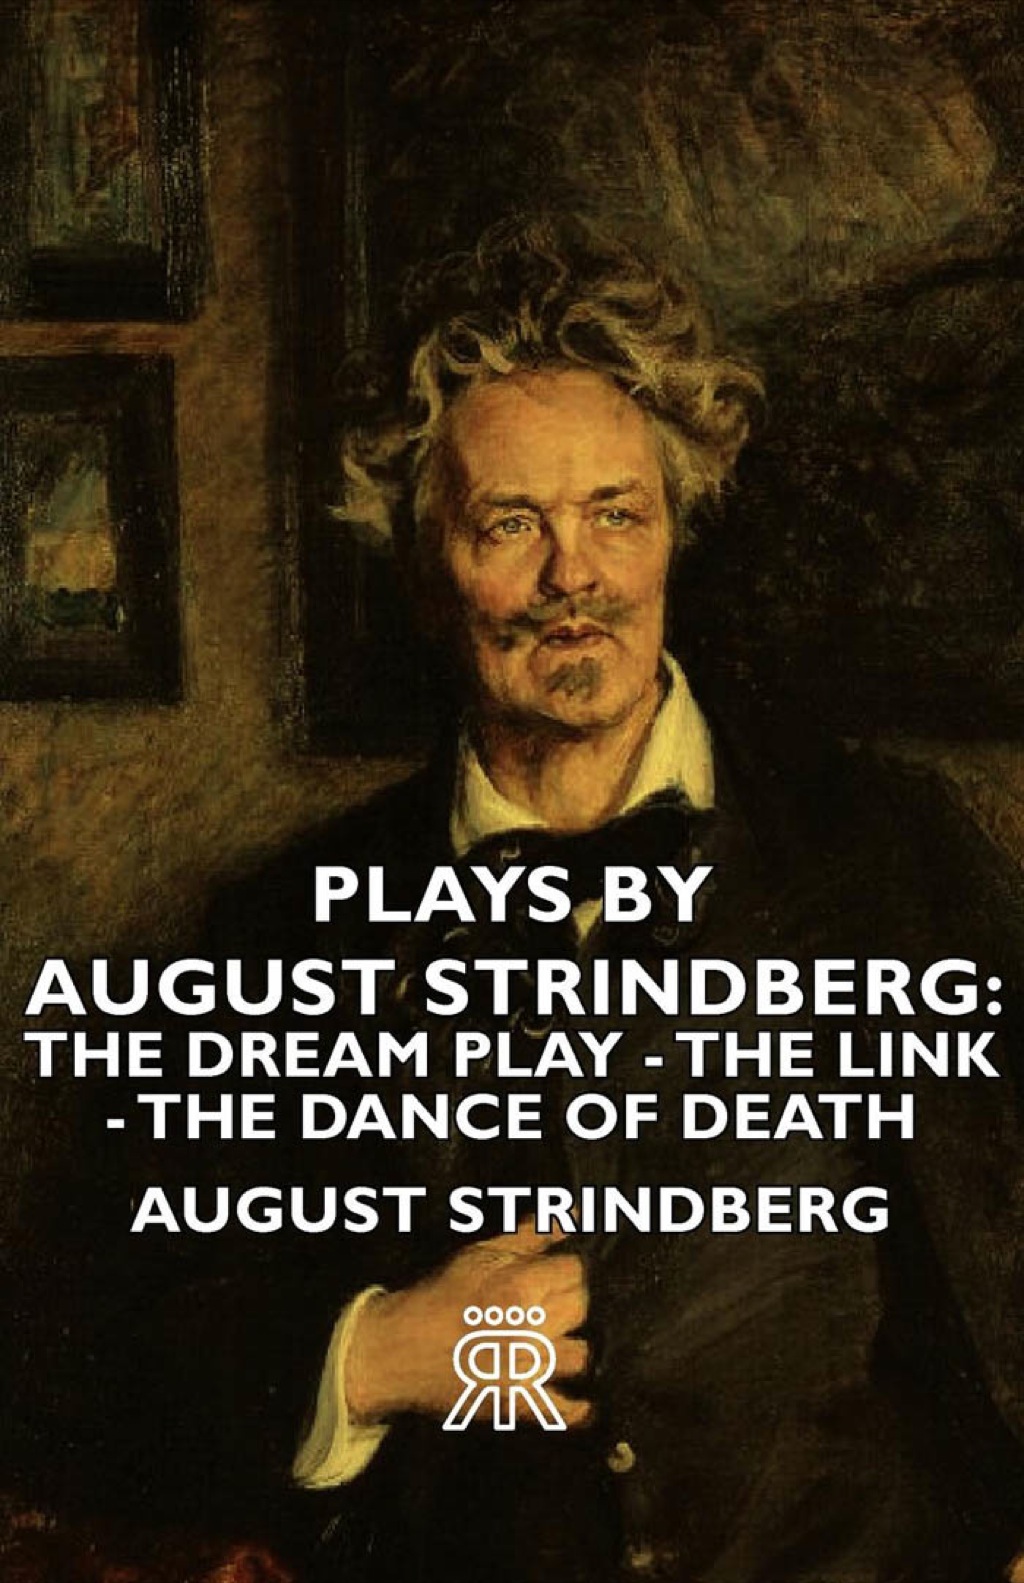 Plays by August Strindberg: The Dream Play - The Link - The Dance of Death (eBook) - August Strindberg,